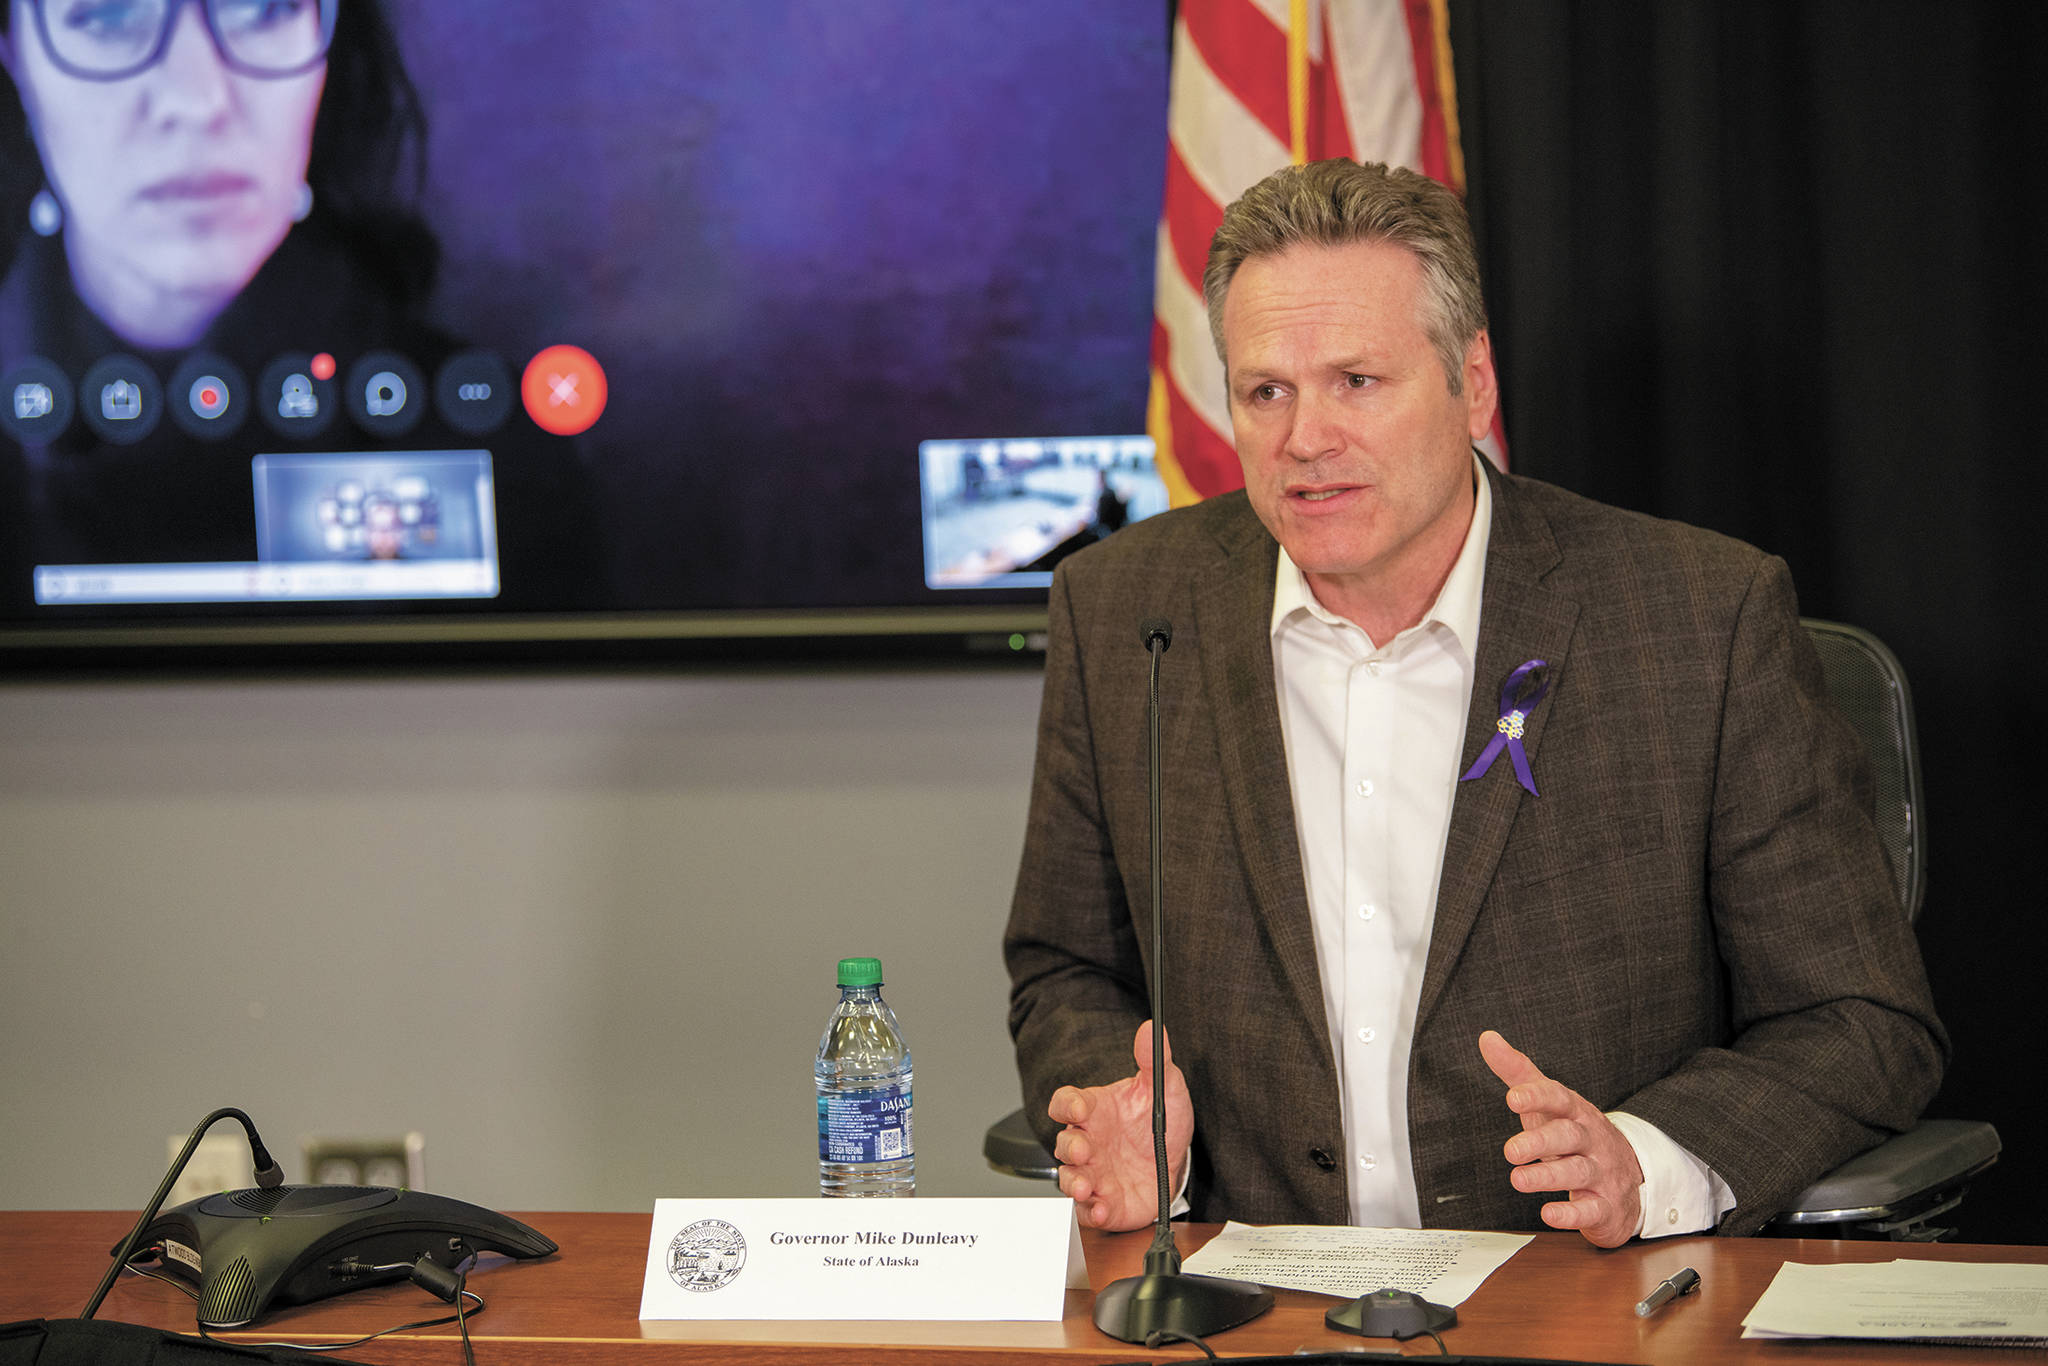 Gov. Mike Dunleavy speaks during a Friday, March 27, 2020 press conference in the Atwood Building in Anchorage, Alaska. (Photo courtesy Office of the Governor)